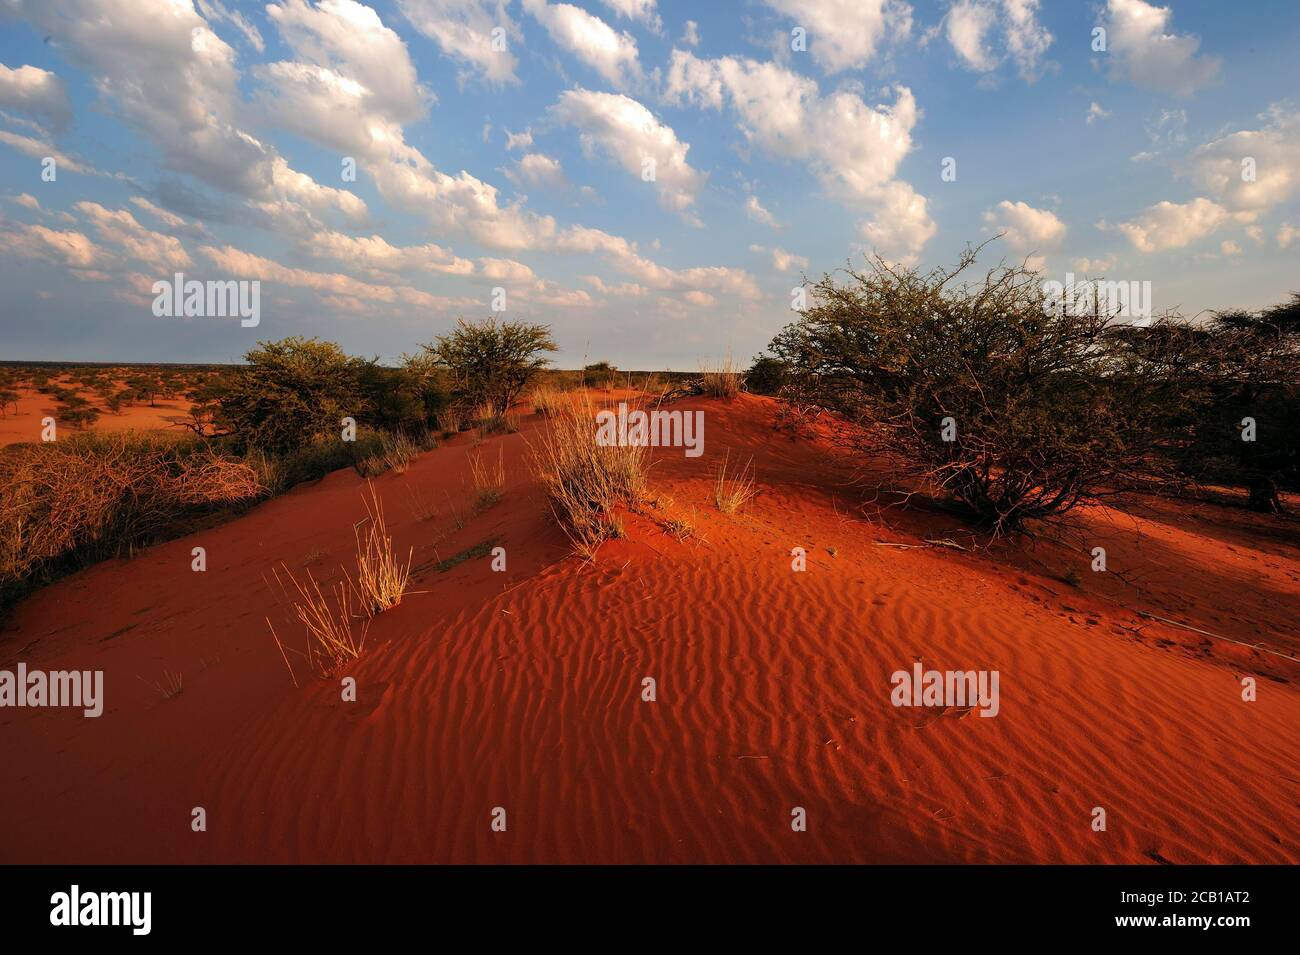 There is a desert in Tamil Nadu and the dunes are red